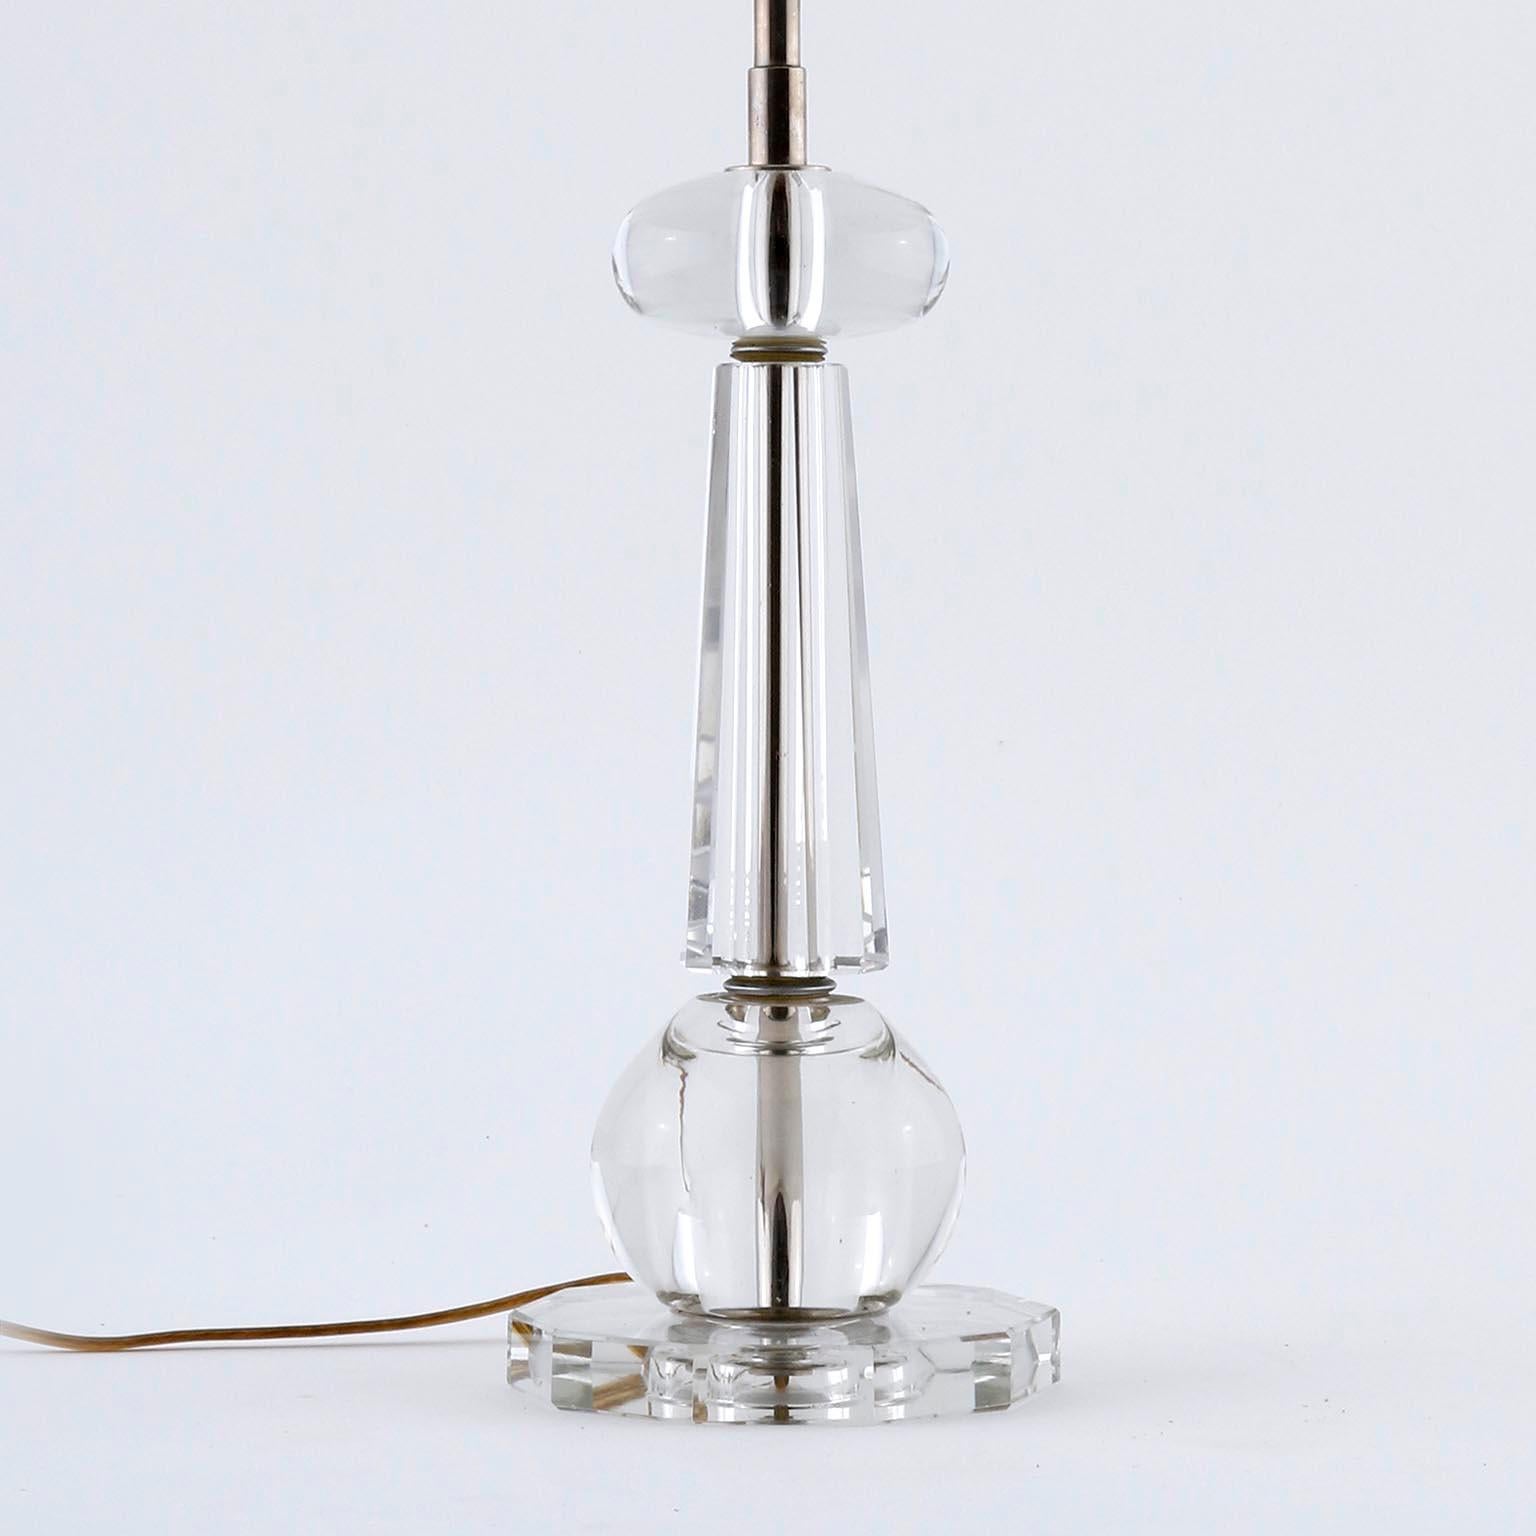 Mid-20th Century Table Lamp, Nickel Cut Crystal Glass White Shade, Austria, 1950s For Sale